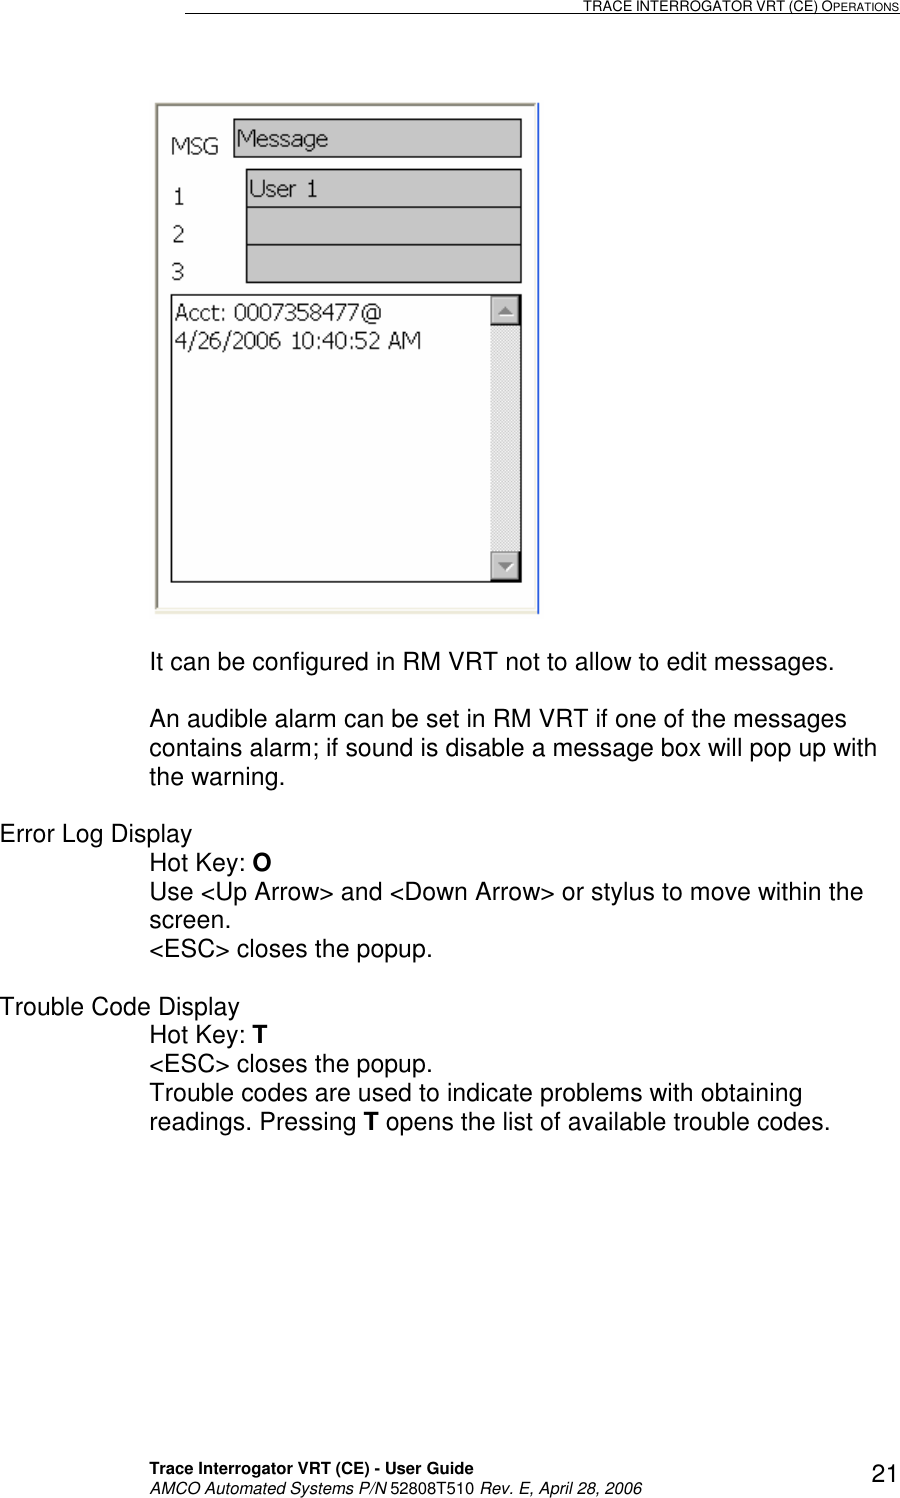                                                                                                                              TRACE INTERROGATOR VRT (CE) OPERATIONS    Trace Interrogator VRT (CE) - User Guide   AMCO Automated Systems P/N 52808T510 Rev. E, April 28, 2006 21  It can be configured in RM VRT not to allow to edit messages.  An audible alarm can be set in RM VRT if one of the messages contains alarm; if sound is disable a message box will pop up with the warning.   Error Log Display Hot Key: O   Use &lt;Up Arrow&gt; and &lt;Down Arrow&gt; or stylus to move within the screen. &lt;ESC&gt; closes the popup.  Trouble Code Display Hot Key: T  &lt;ESC&gt; closes the popup. Trouble codes are used to indicate problems with obtaining readings. Pressing T opens the list of available trouble codes.  